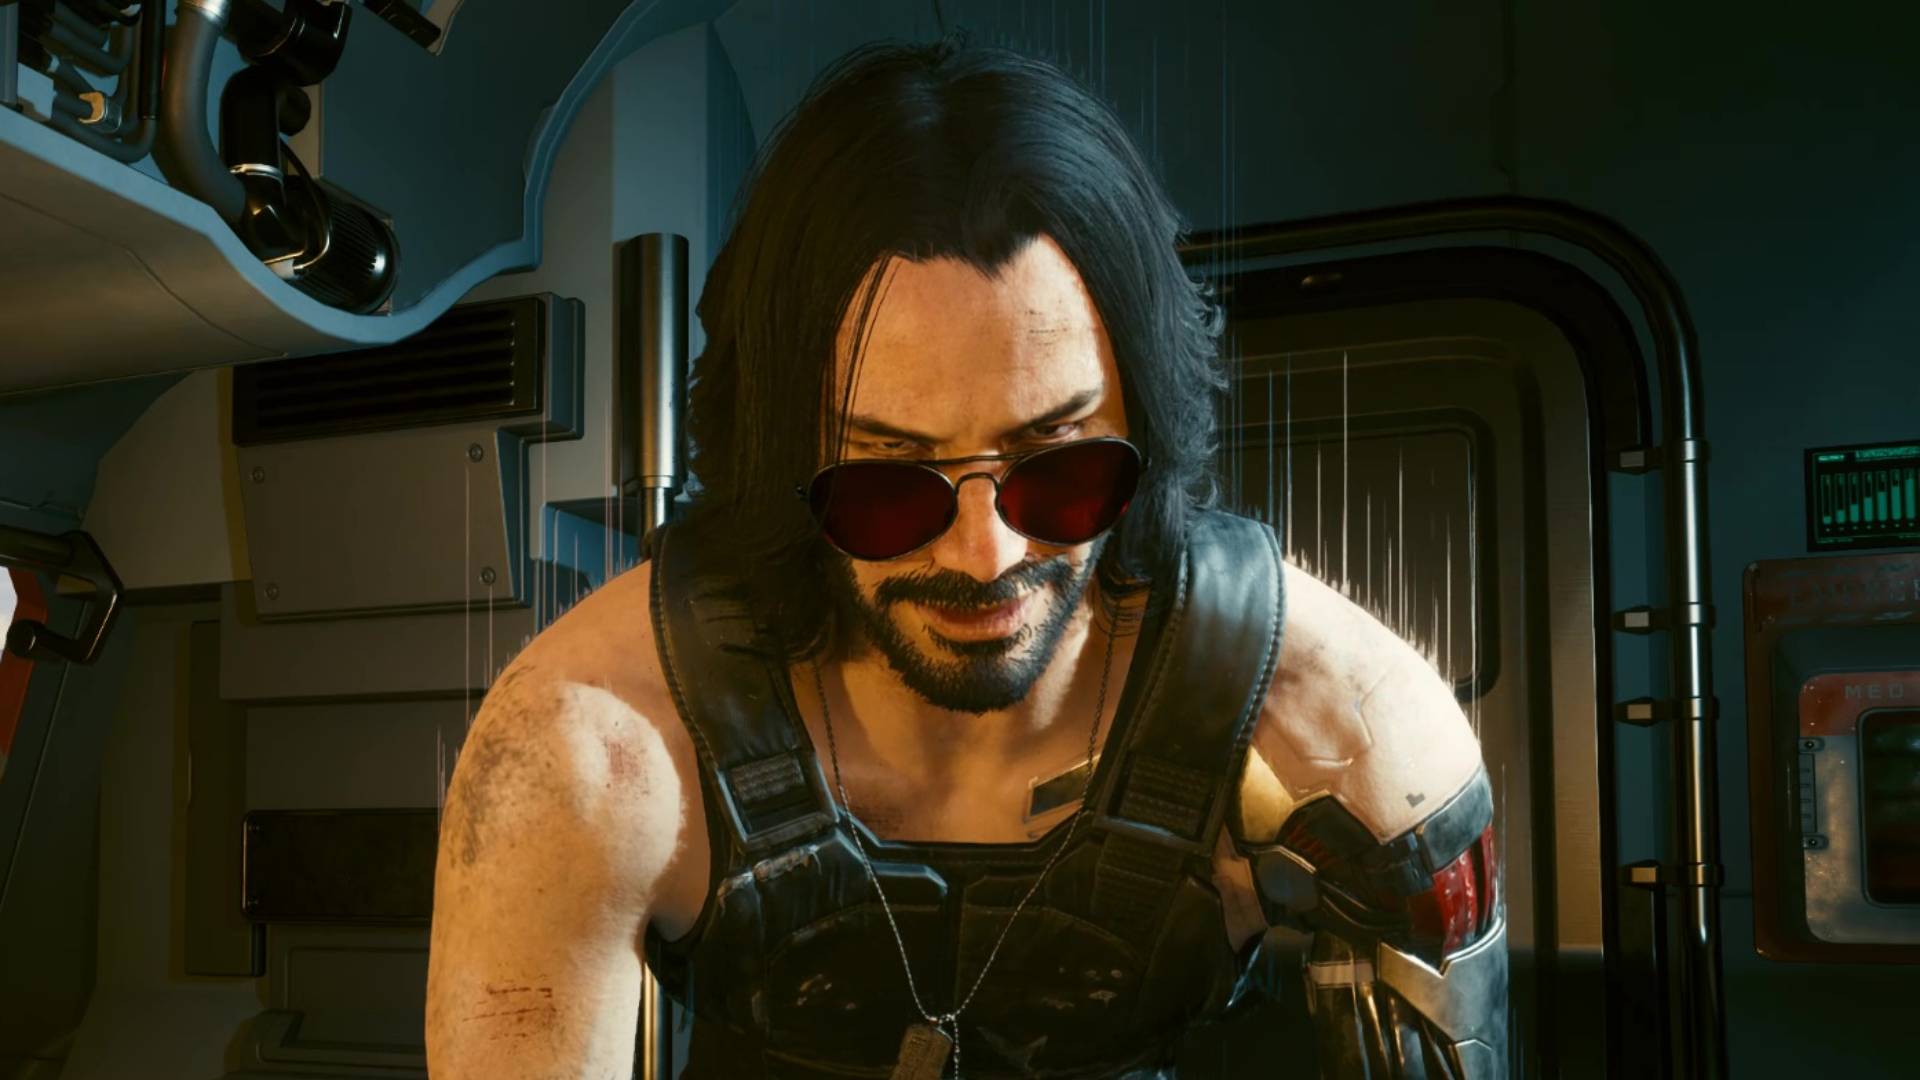 Johnny Silverhand stares intensely at V during one of the Cyberpunk 2077 Phantom Liberty endings.